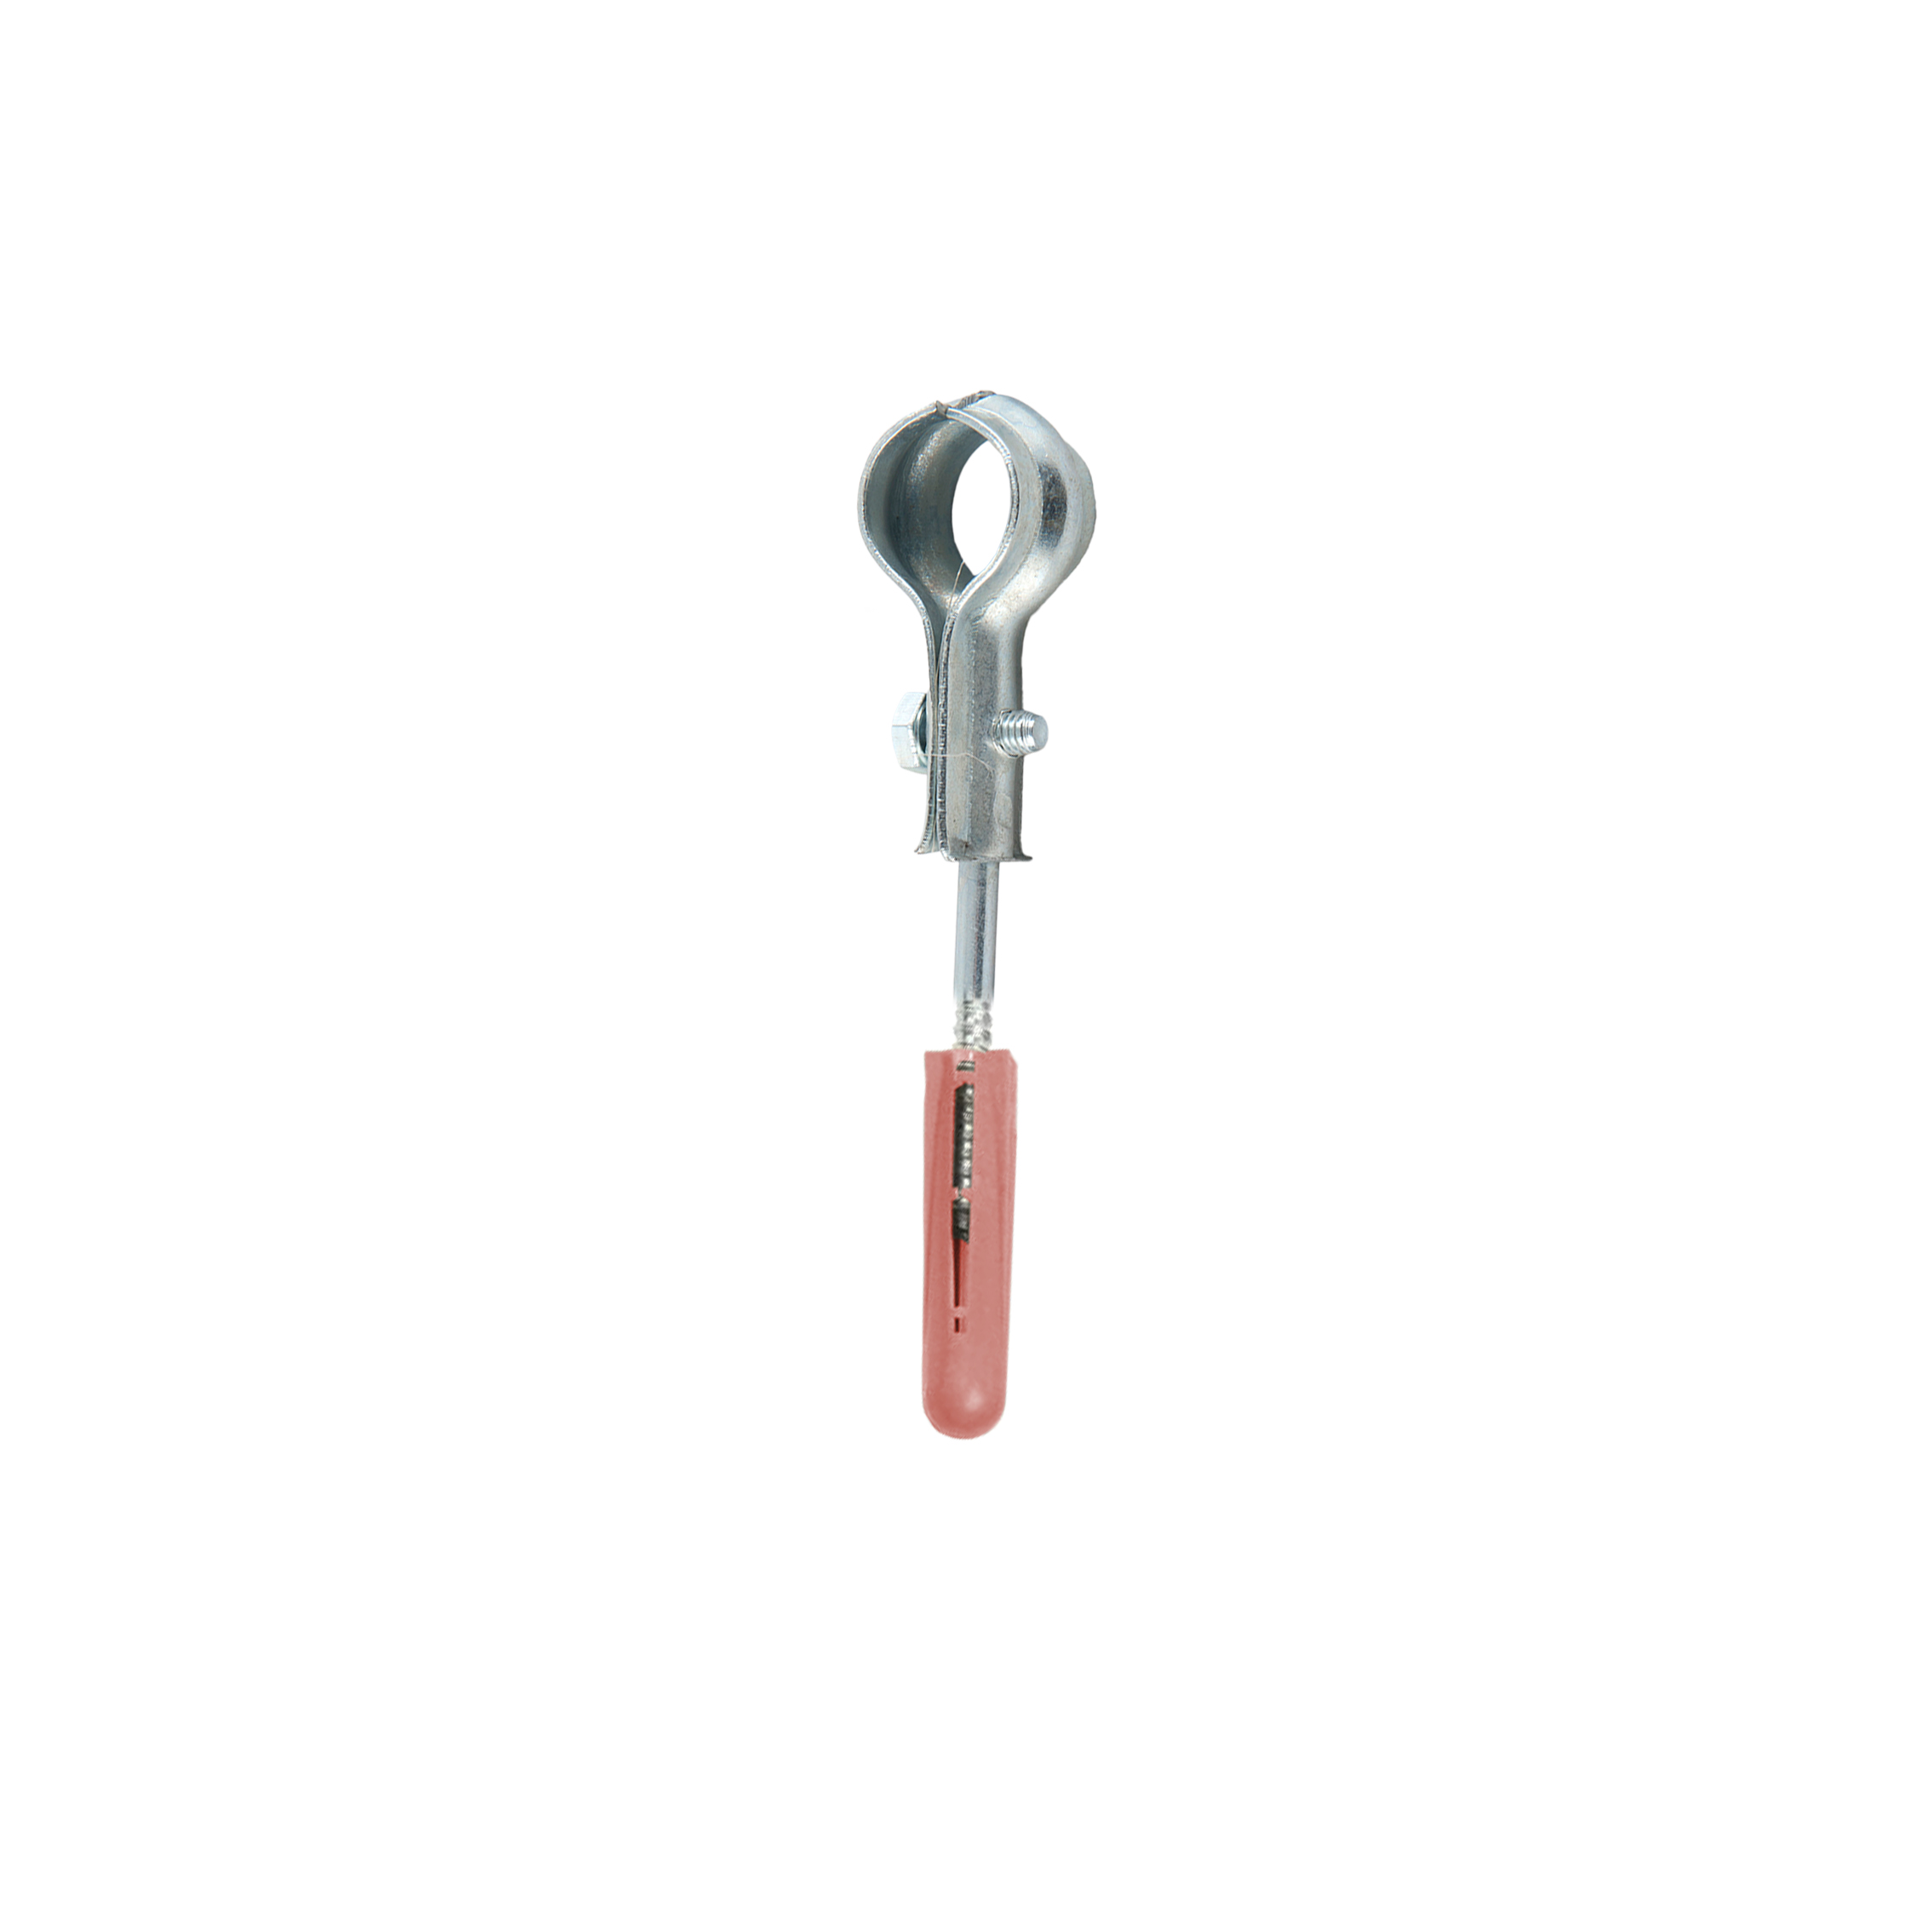 Pipe clamp & hanger Bolt with counter nut & anchor (3/8